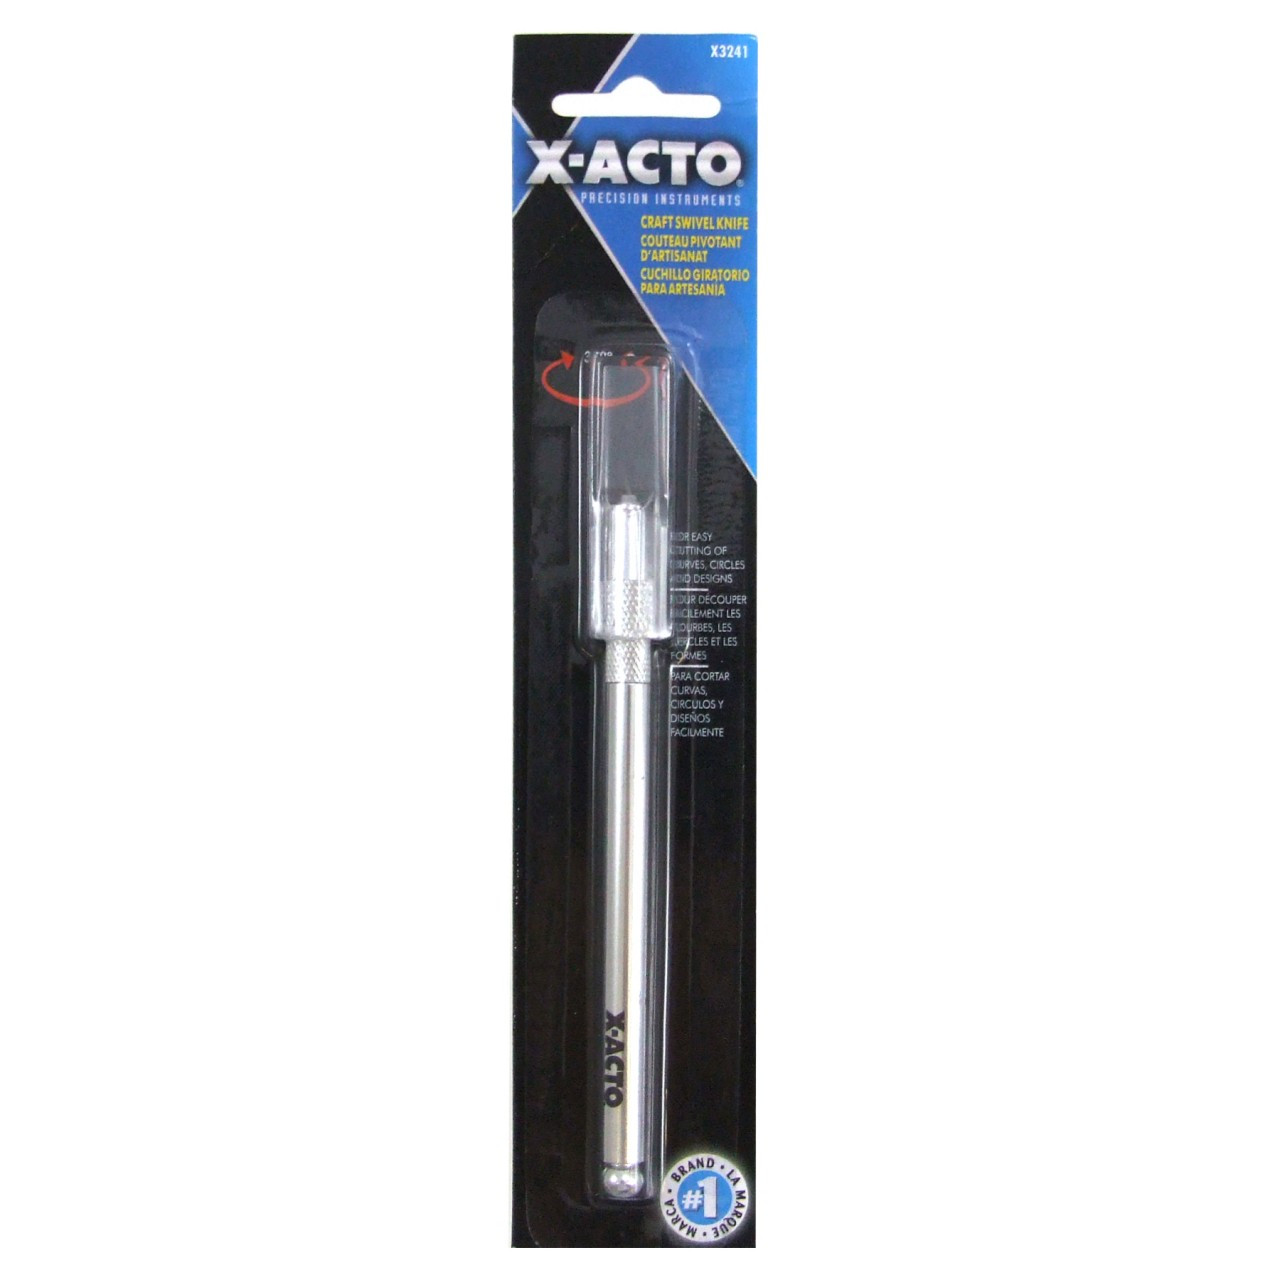 X-ACTO Craft Swivel Knife with Safety Cap (Card 1)